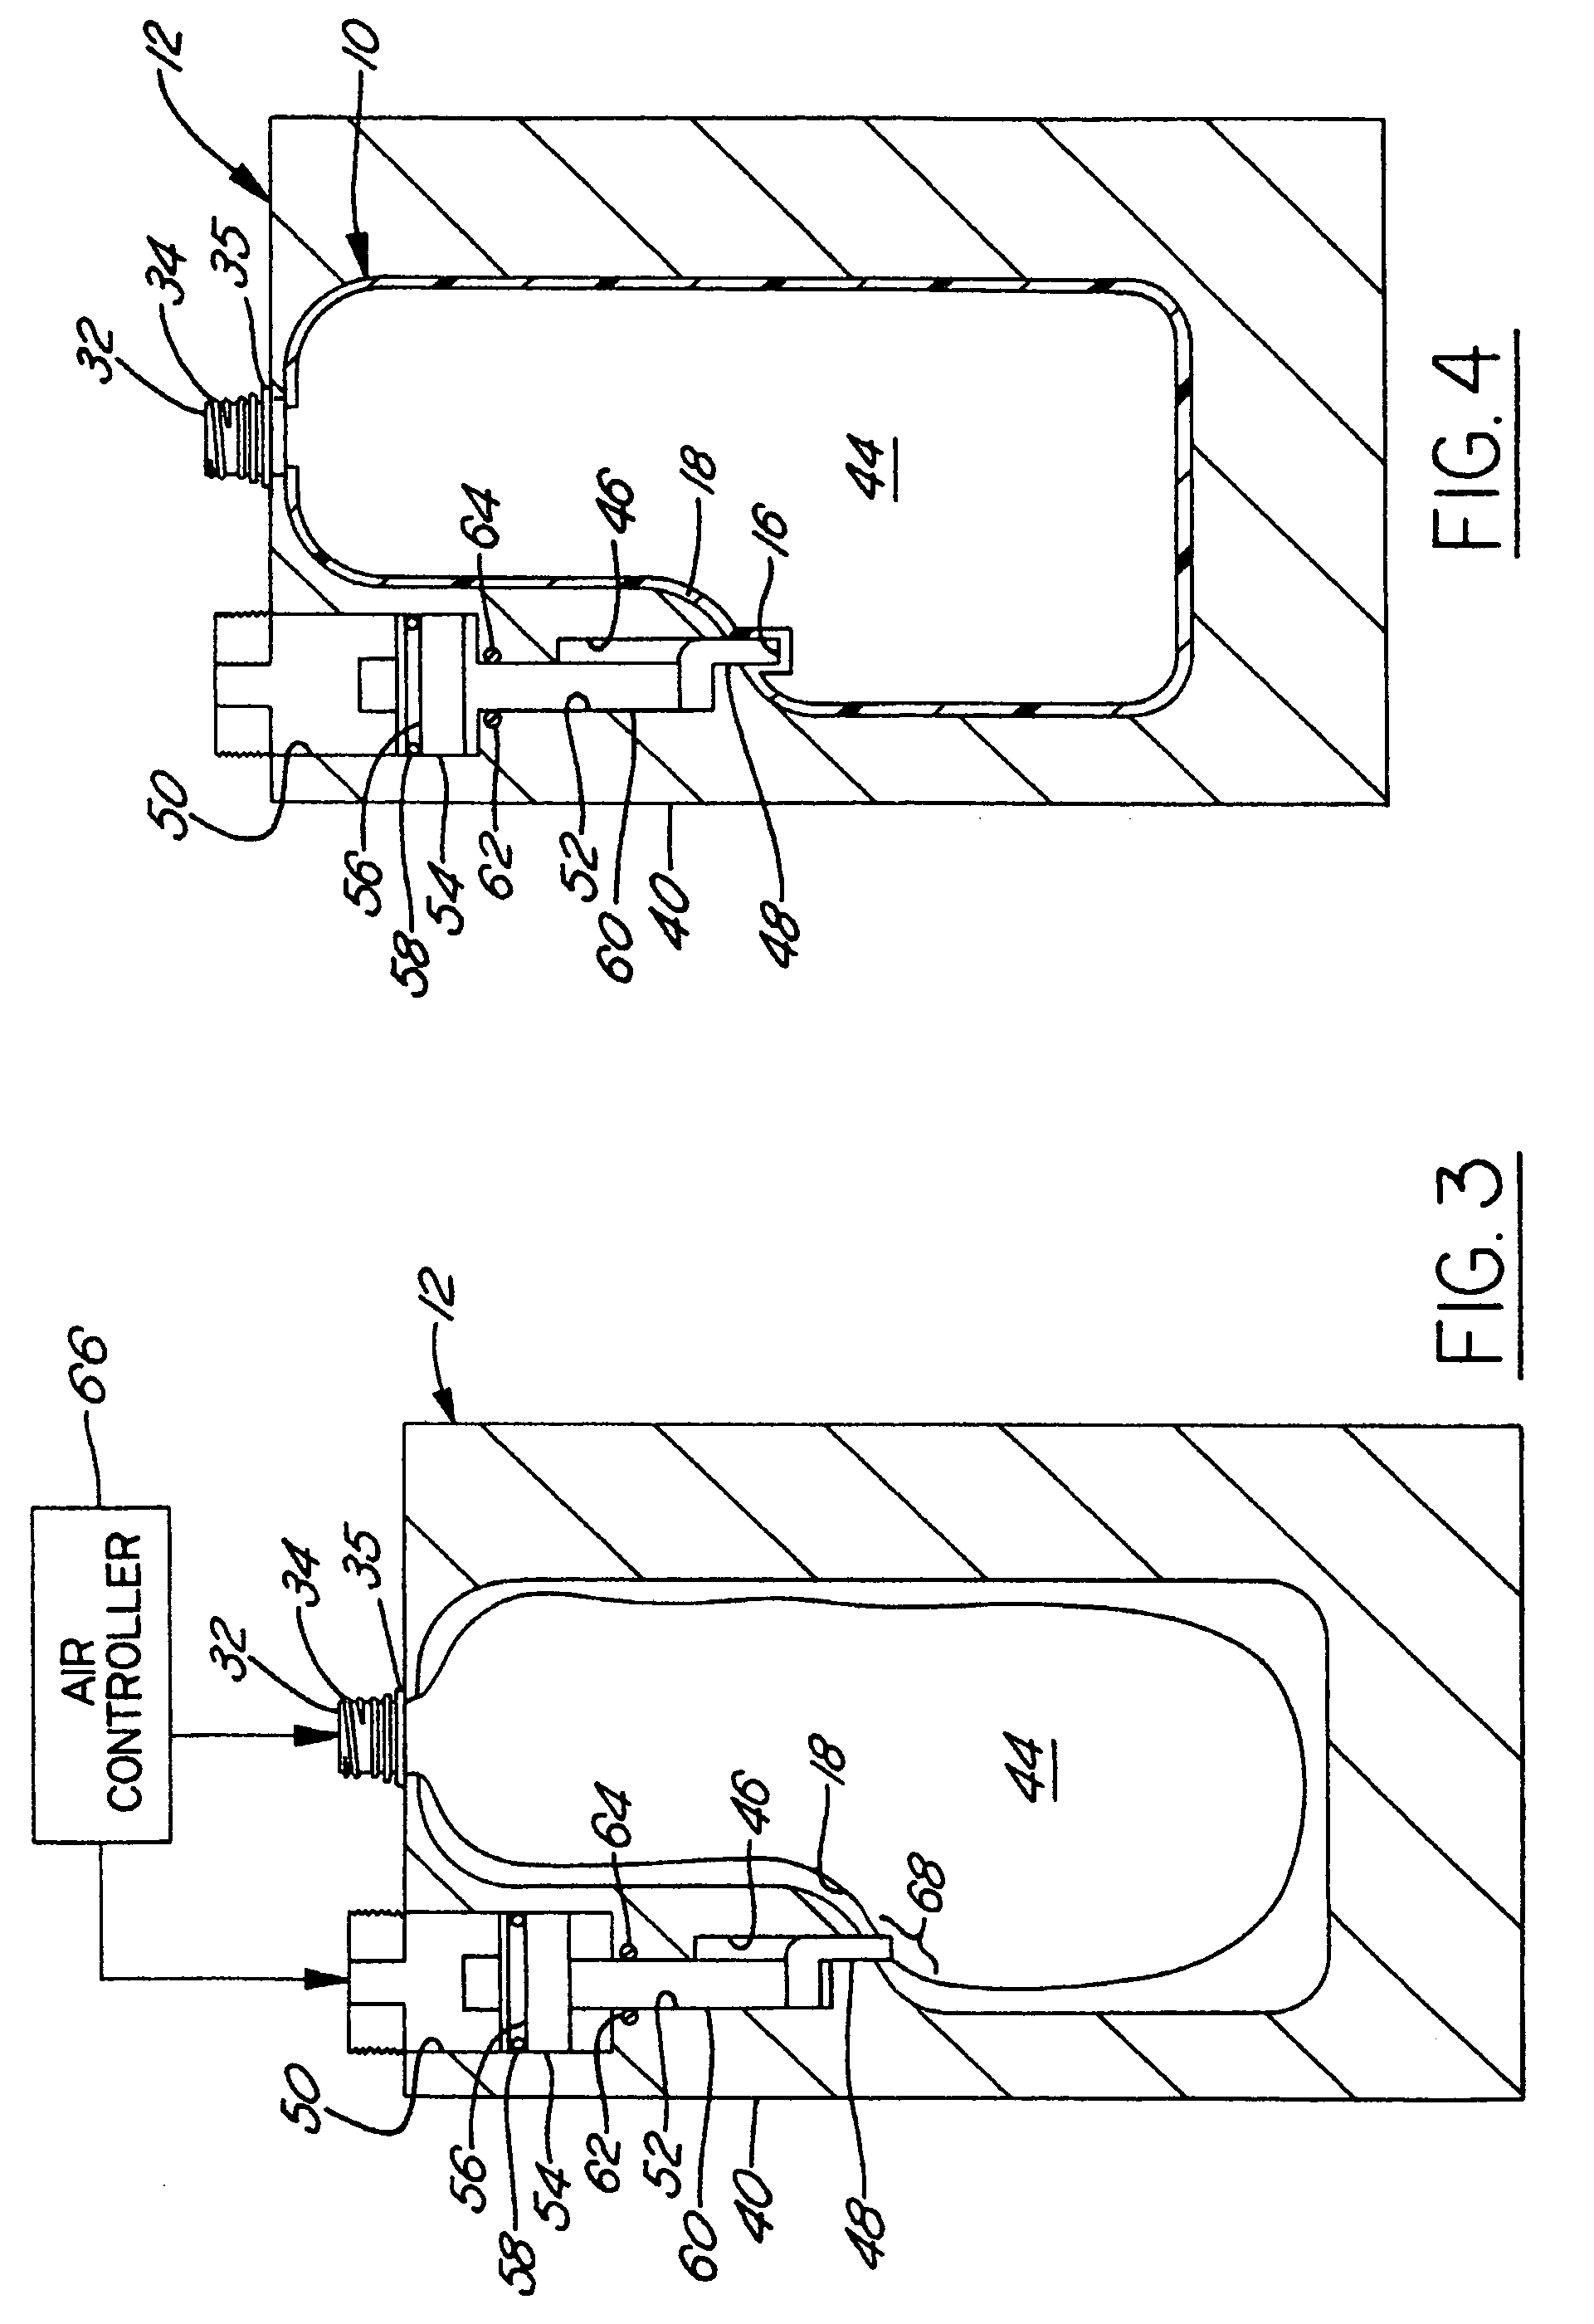 Method of reheat blow molding a container